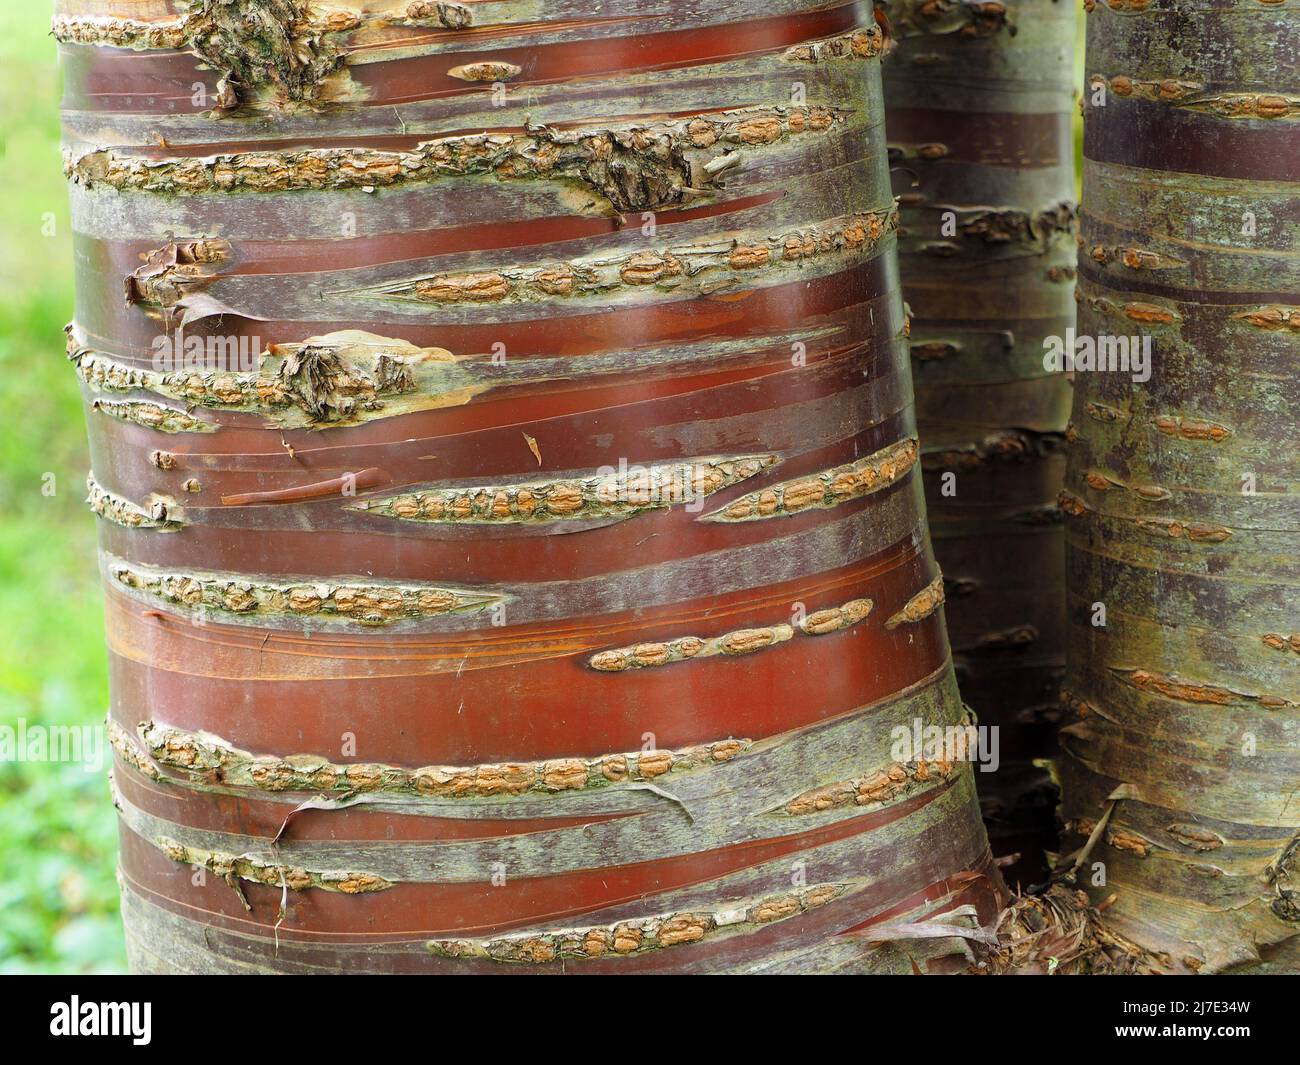 Trunk of a mature Prunus Serrula tree (Japanese or Tibetan cherry) showing its peeling bark and how the newly exposed red bark fades making stripes. Stock Photo